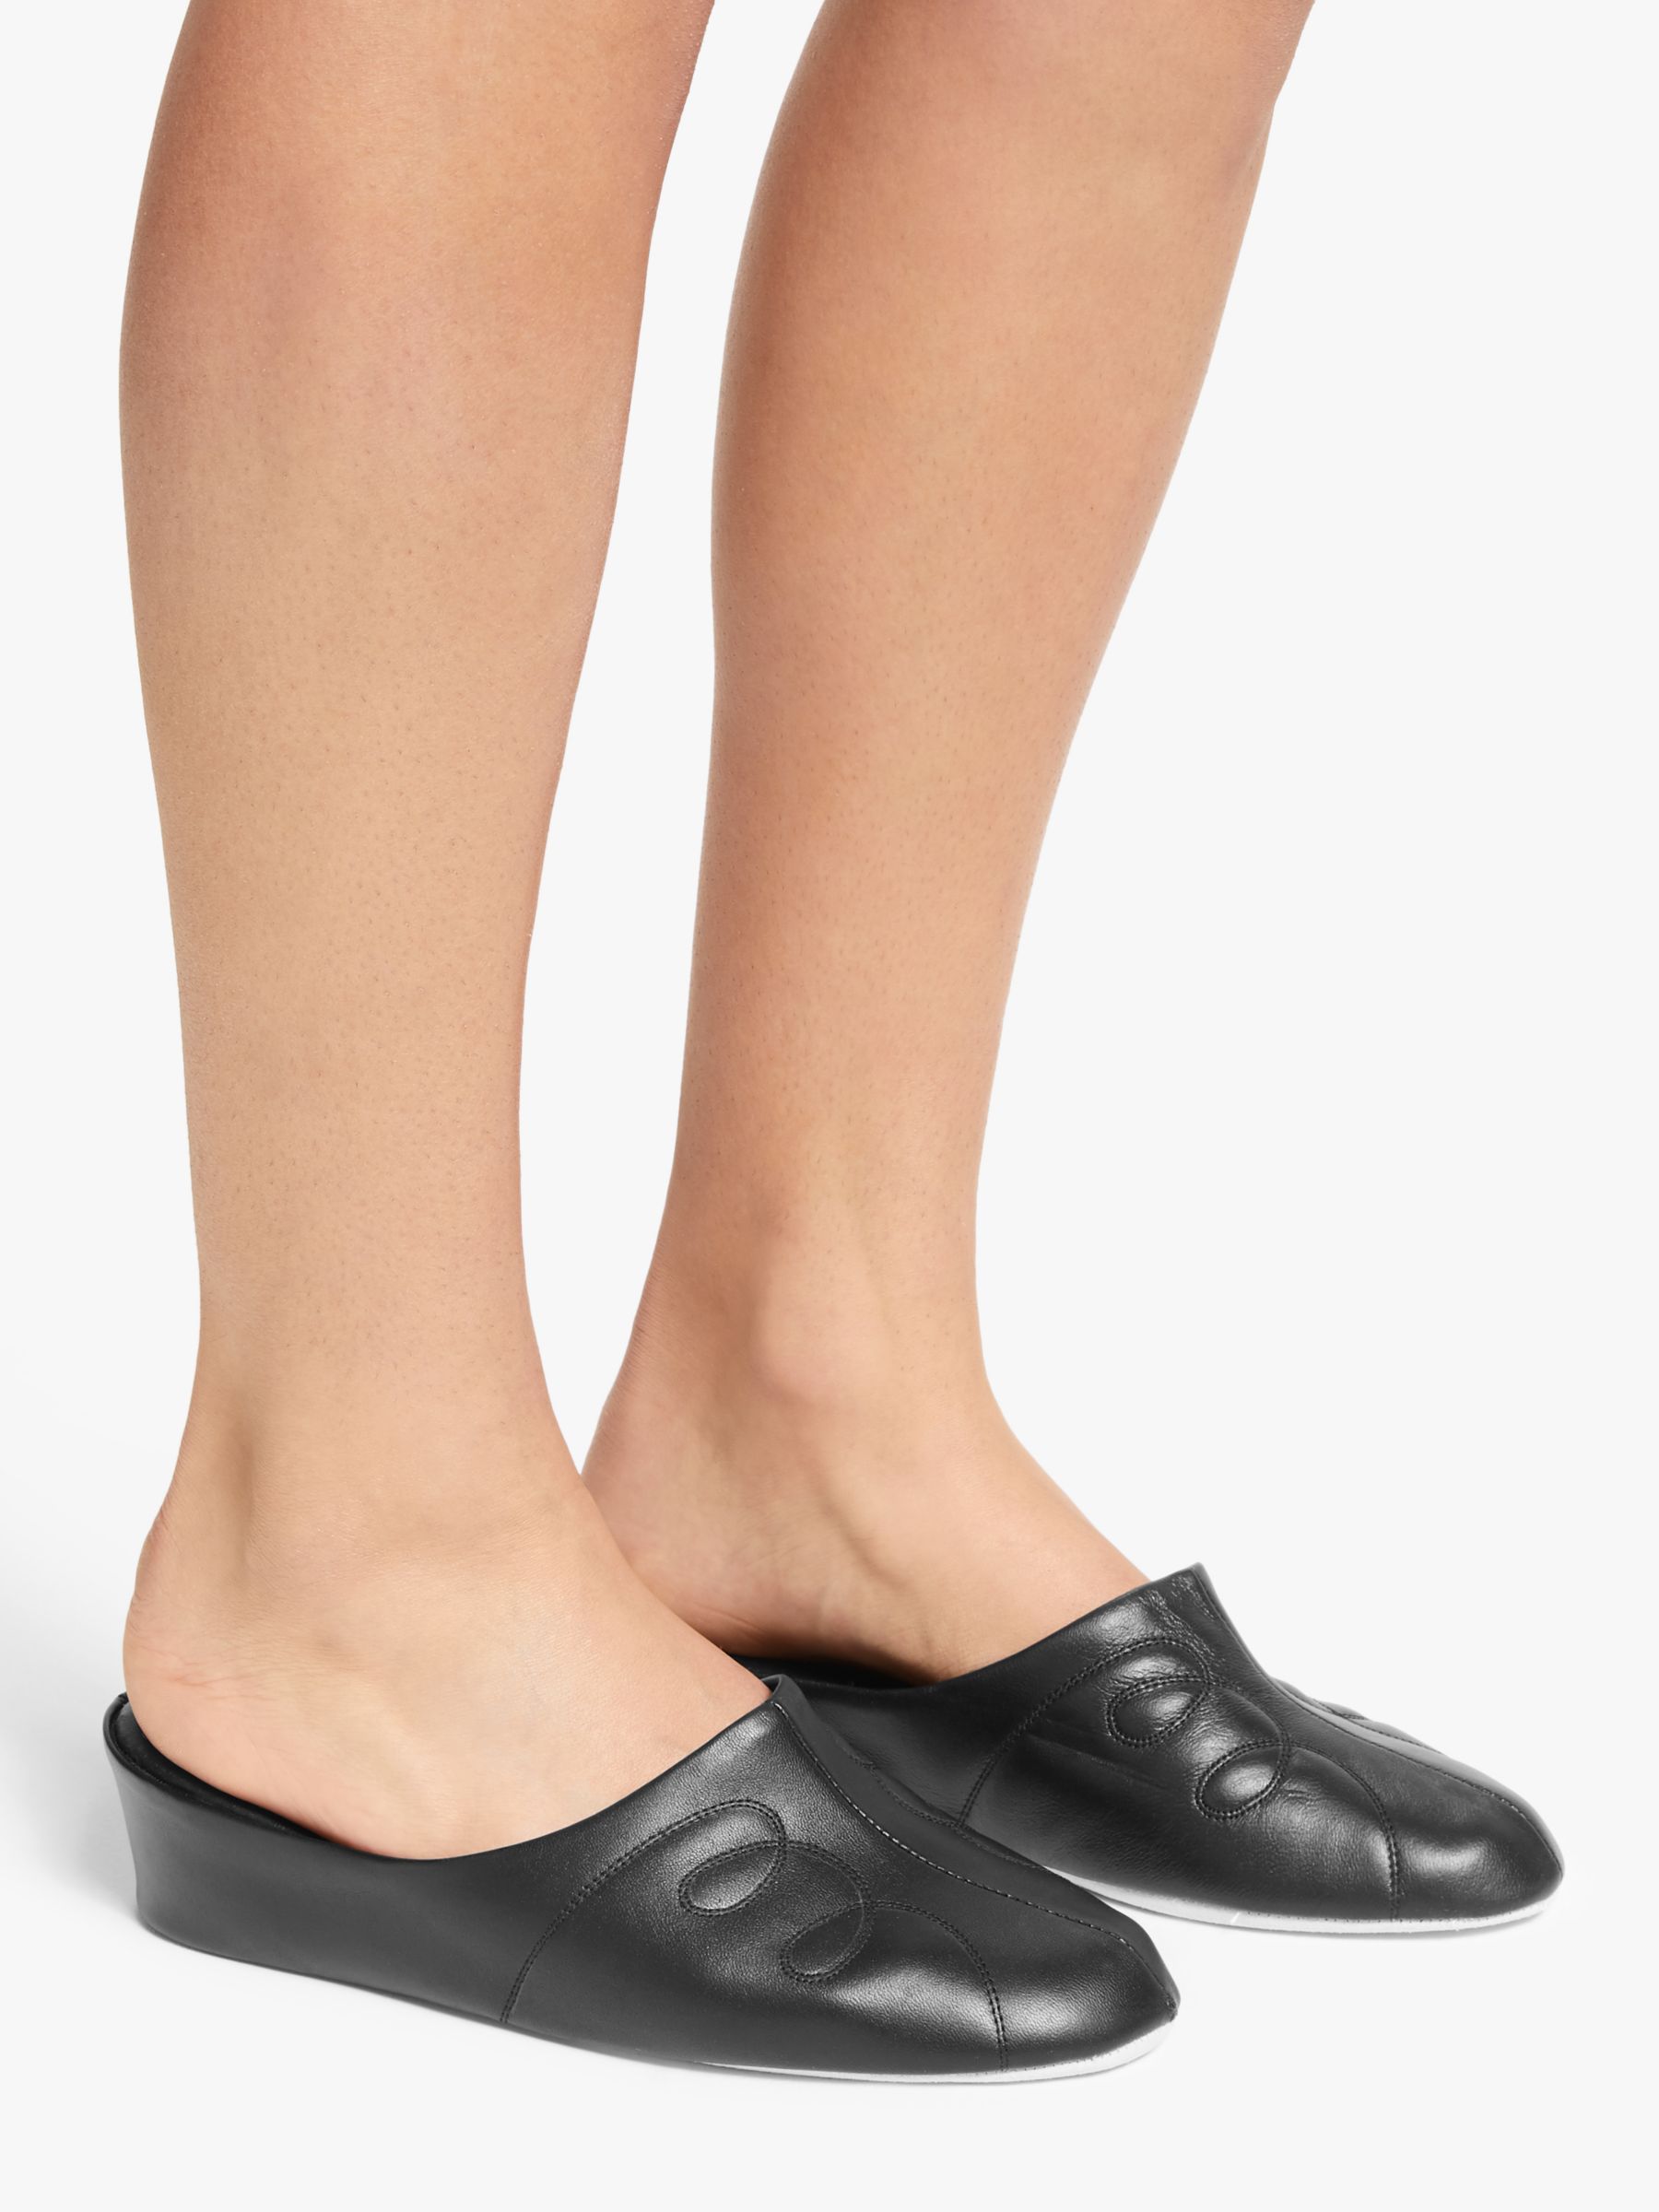 Buy John Lewis Tricia Leather Mule Slippers Online at johnlewis.com